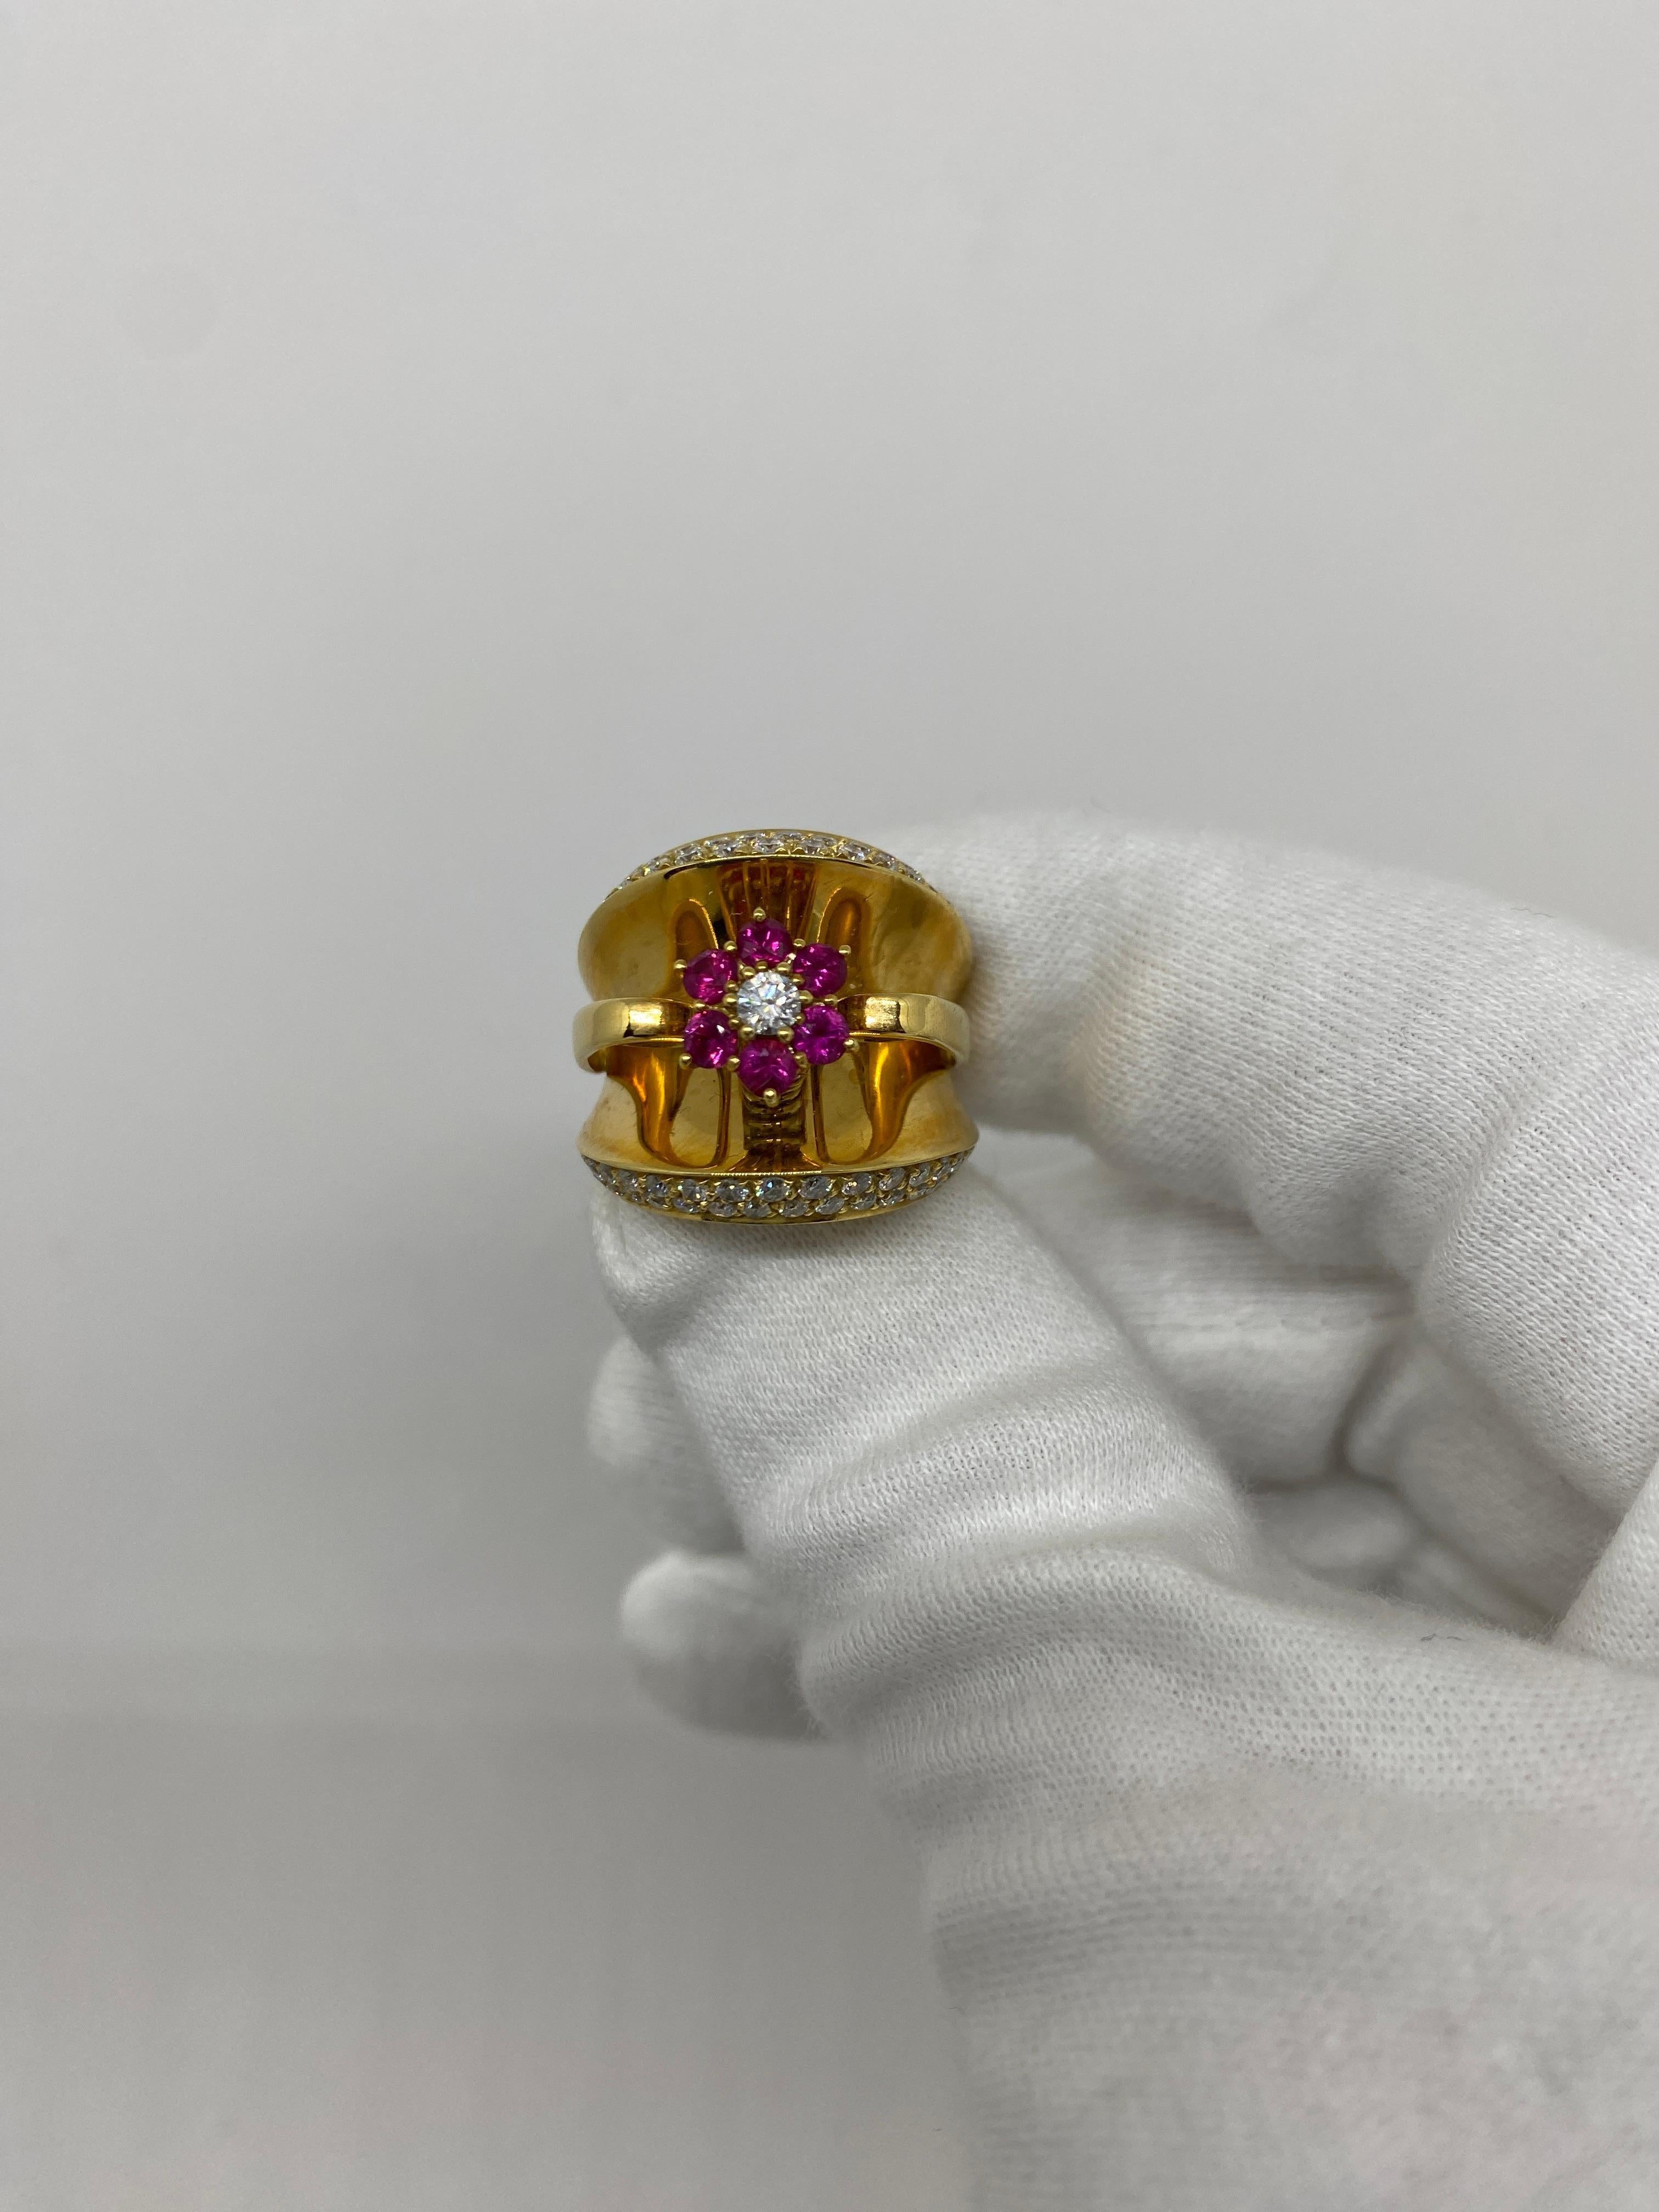 Ring made of 18kt yellow gold with brilliant-cut natural rubies for ct.0.67 and central brilliant-cut natural diamond for ct.0.69

Welcome to our jewelry collection, where every piece tells a story of timeless elegance and unparalleled